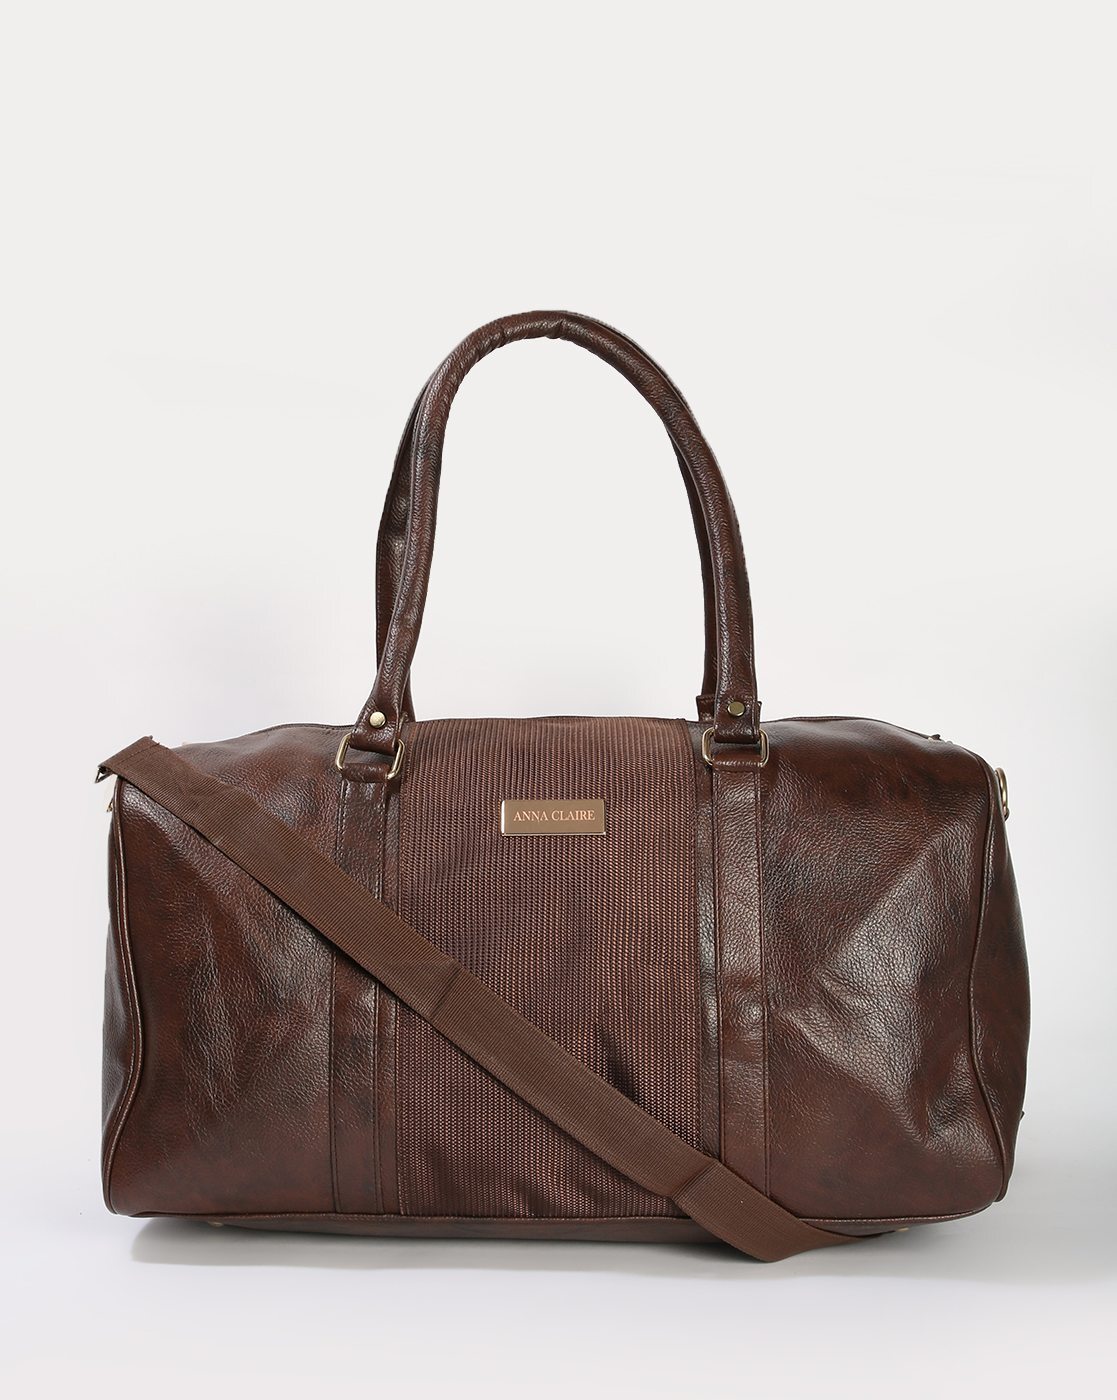 Buy Brown Travel Bags for Men by Leather World Online | Ajio.com